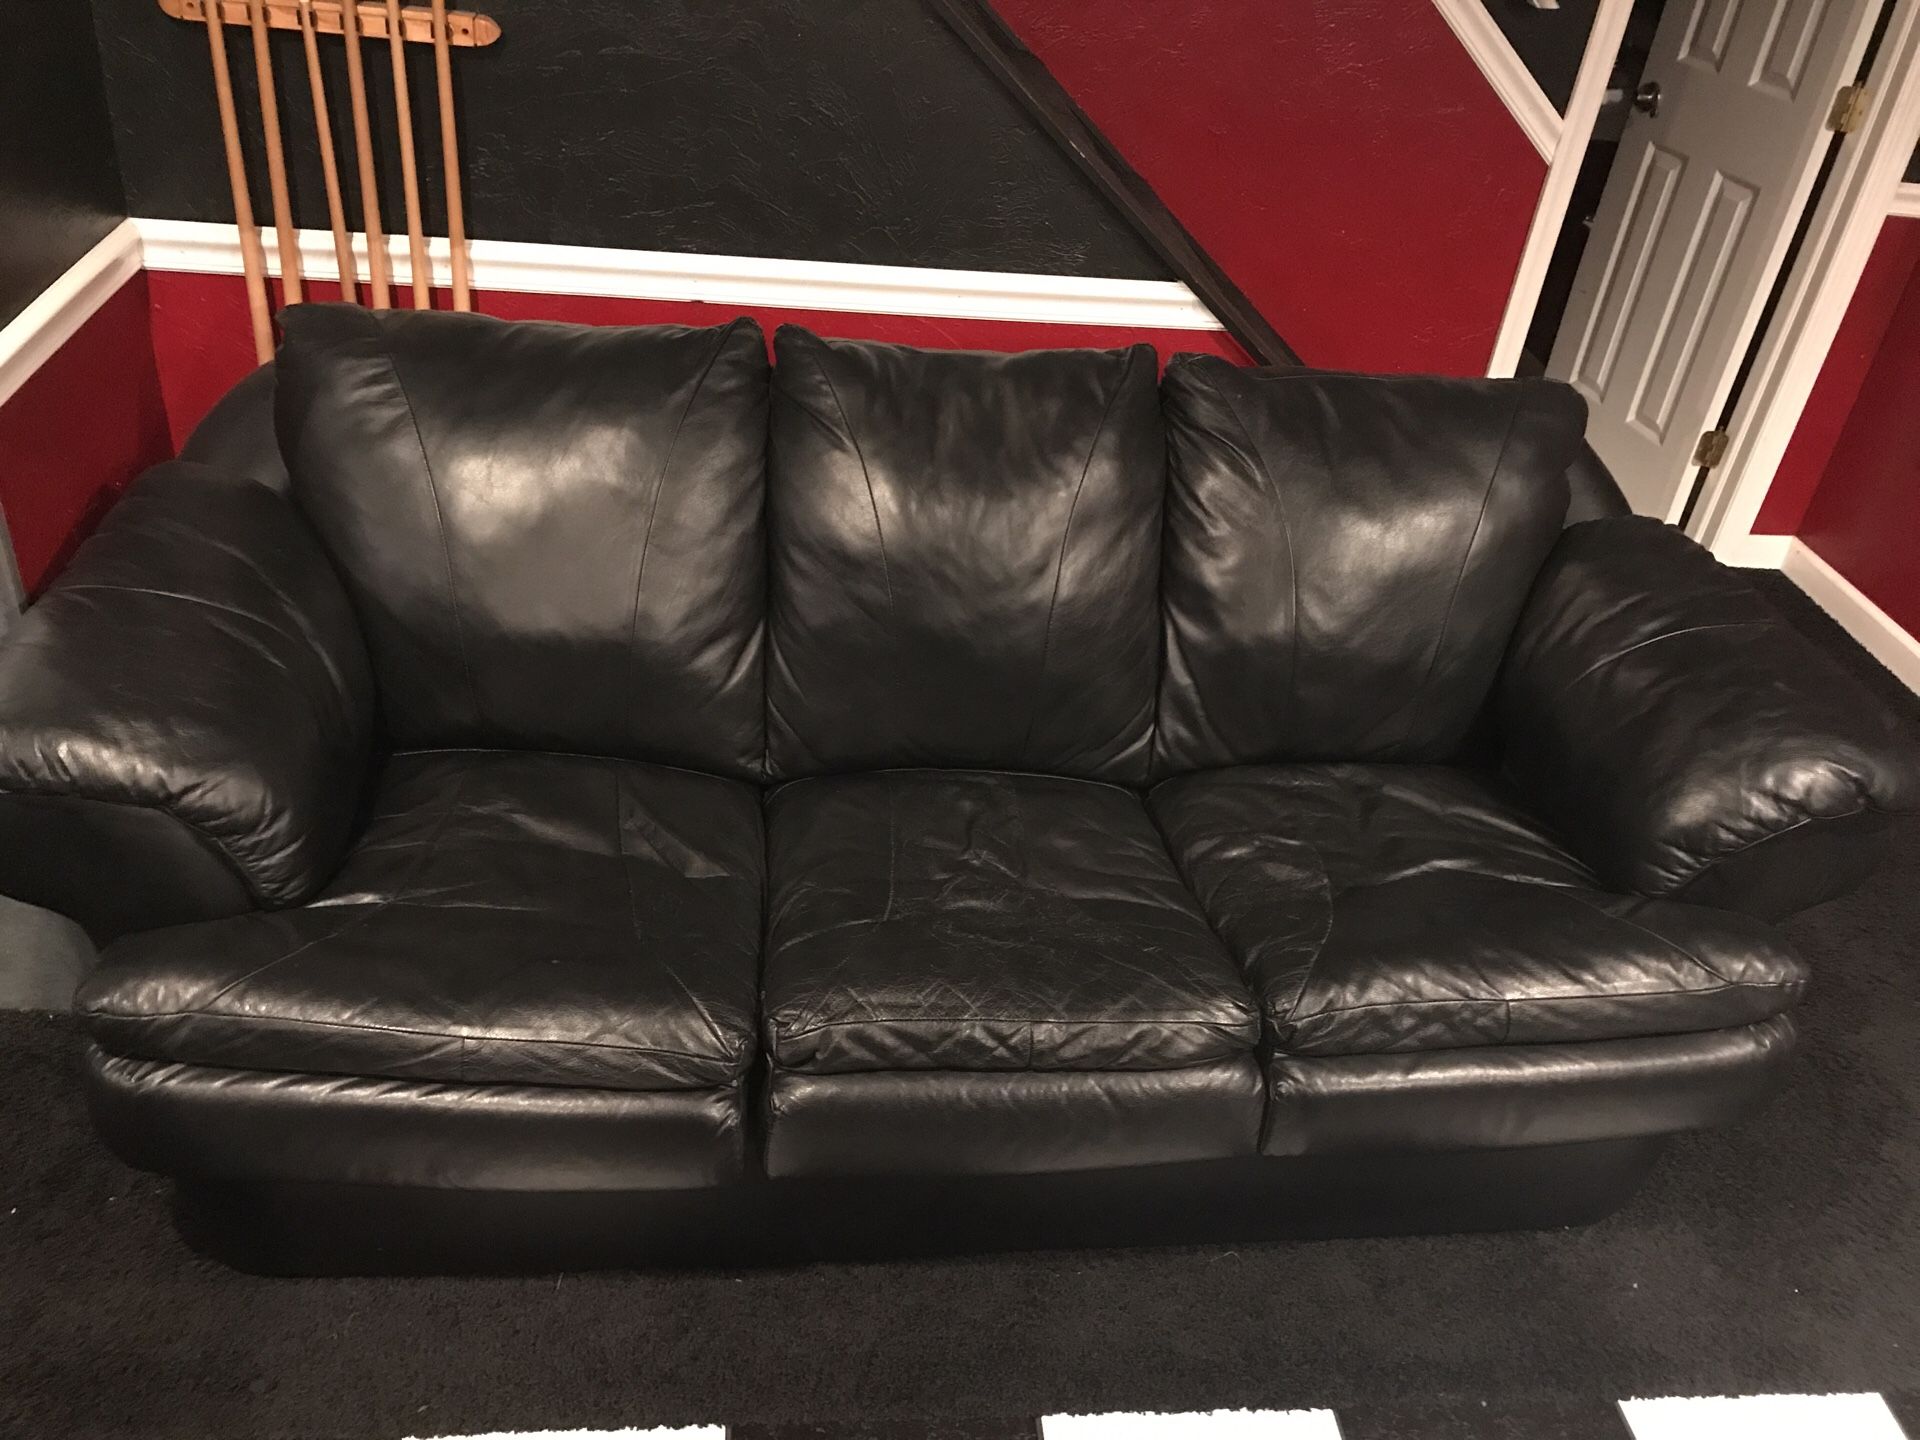 BLACK LEATHER SOFA-PERFECT FOR BASEMENT OR STARTING OUT $150